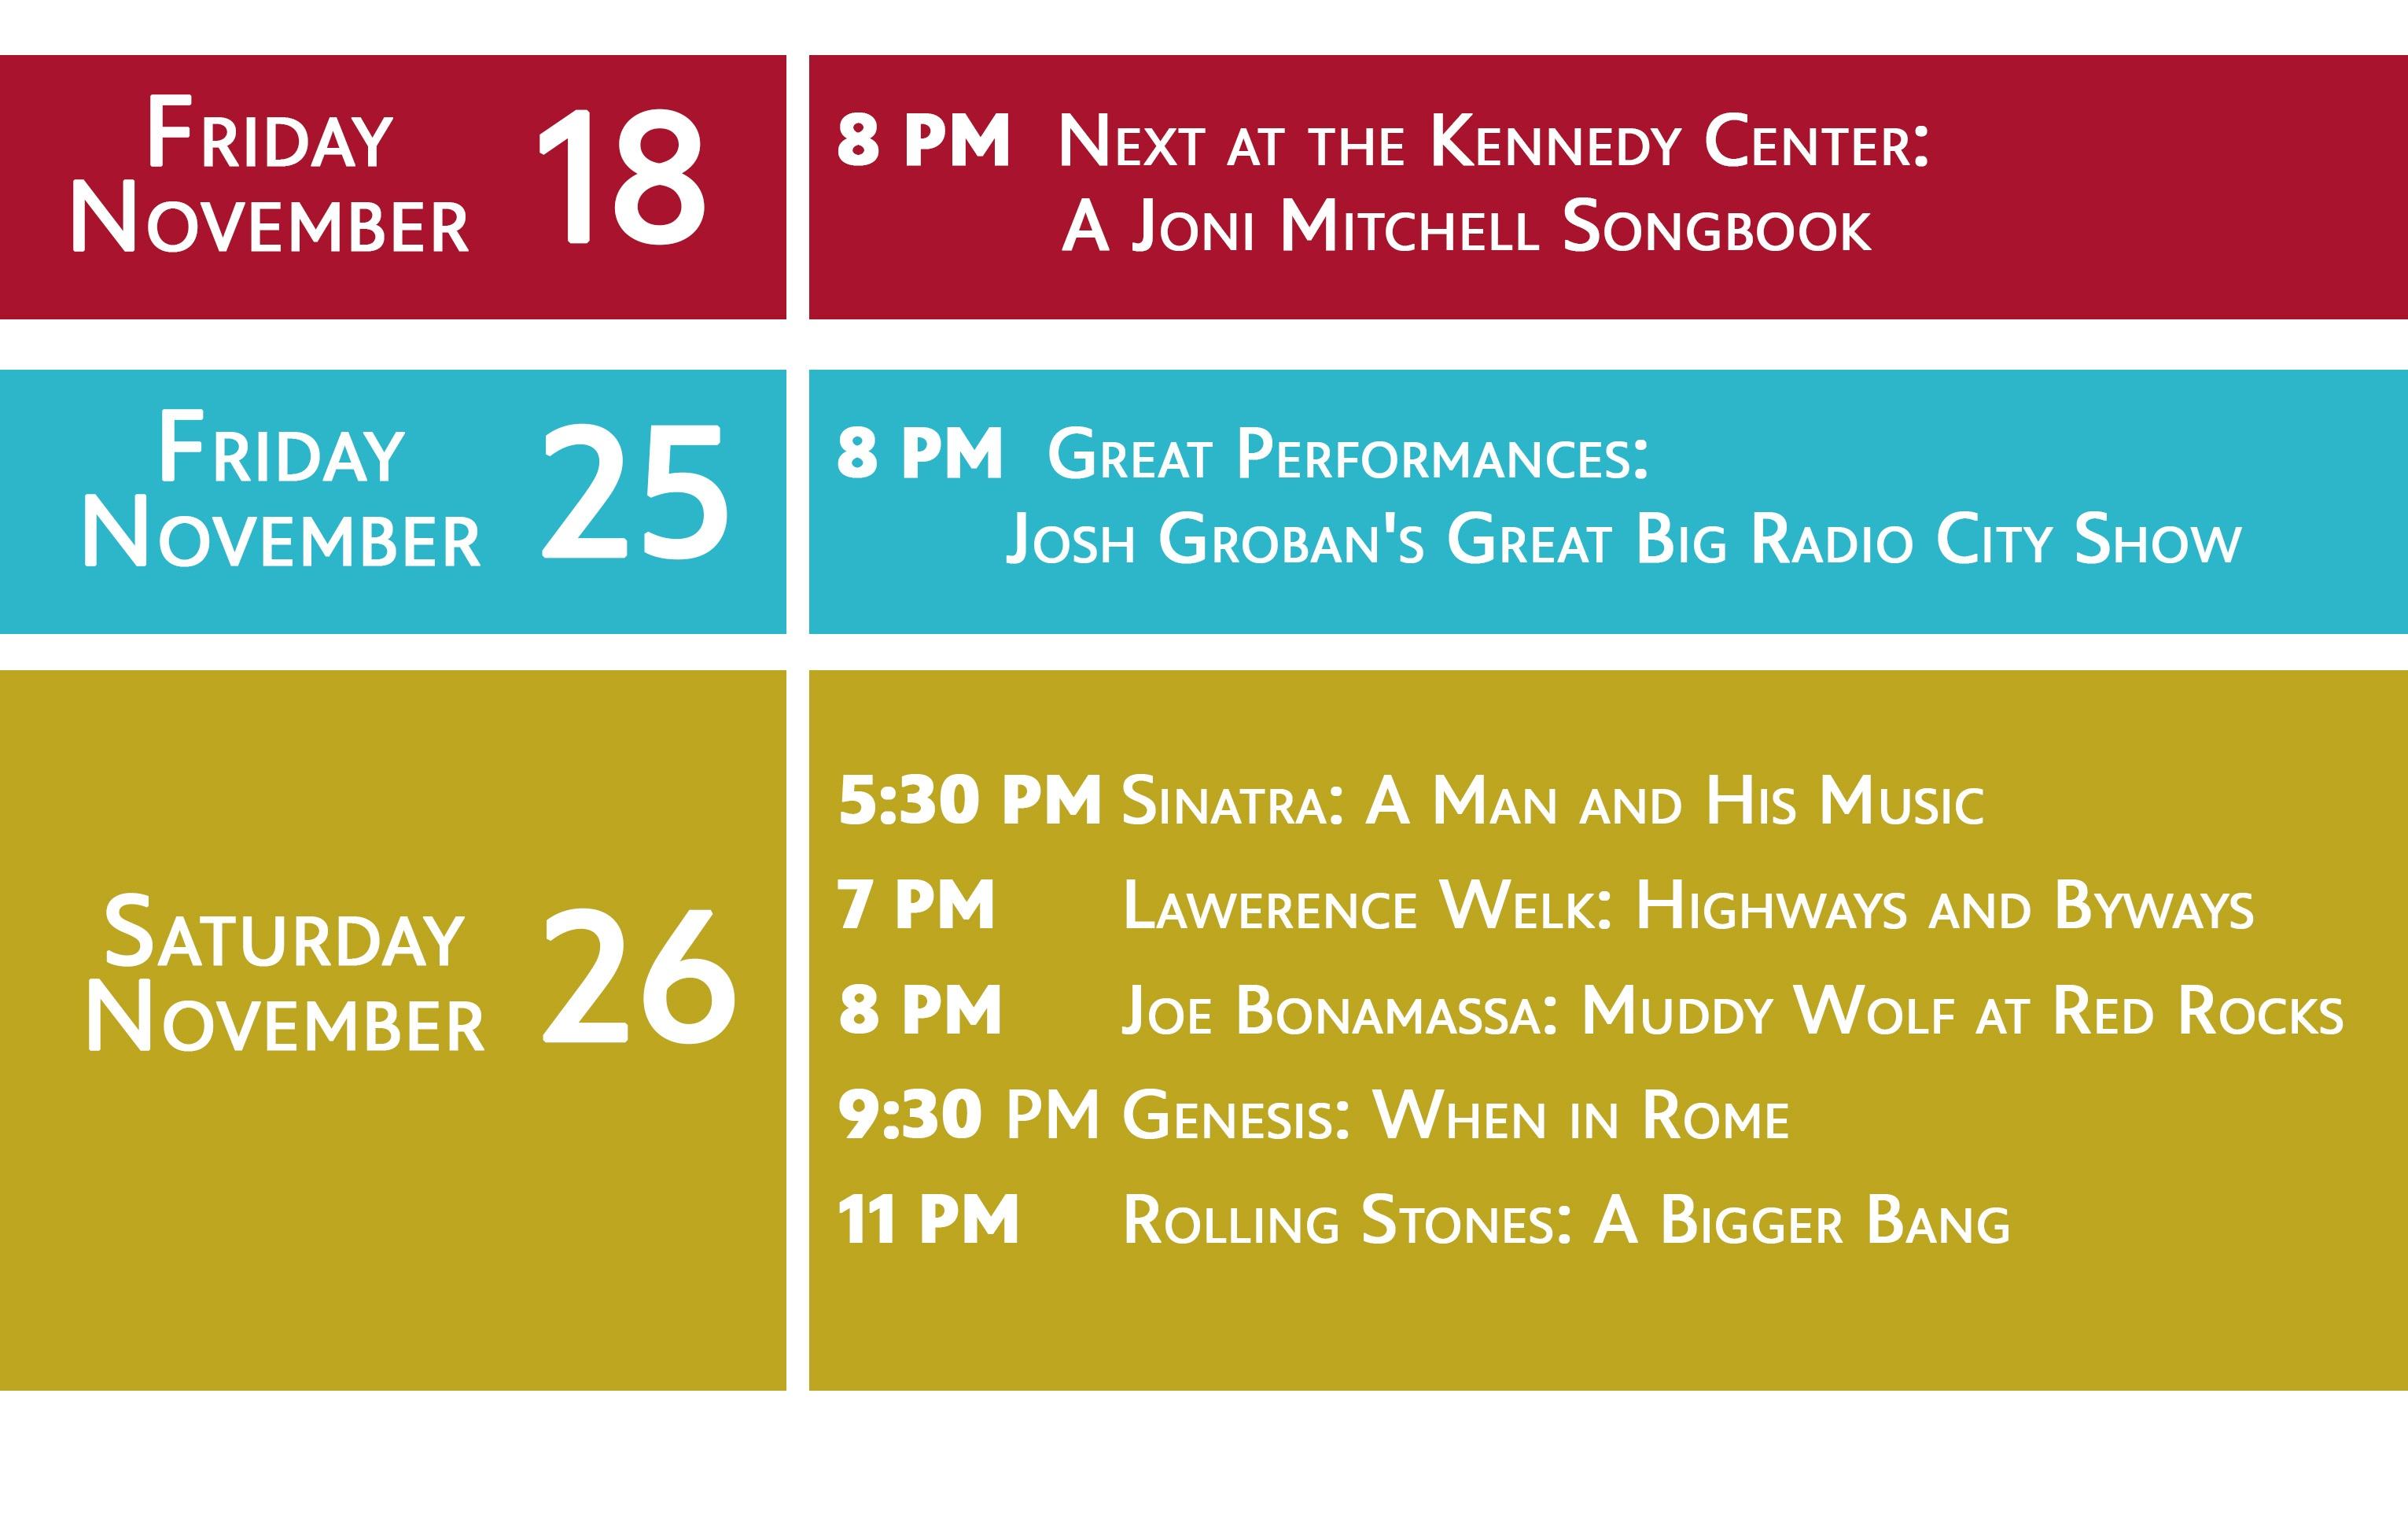 FRIDAY NOVEMBER 18 8 PM Next at the Kennedy Center: A Joni Mitchell Songbook | FRIDAY NOVEMBER 25 8 PM Great Performances: Josh Groban's Great Big Radio City Show |  SATURDAY NOVEMBER 26 5:30 PM	Sinatra: A Man and His Music 7 PM	Lawerence Welk: Highways and Byways 8 PM	Joe Bonamassa: Muddy Wolf at Red Rocks 9:30 PM	Genesis: When in Rome 11 PM	Rolling Stones: A Bigger Bang 